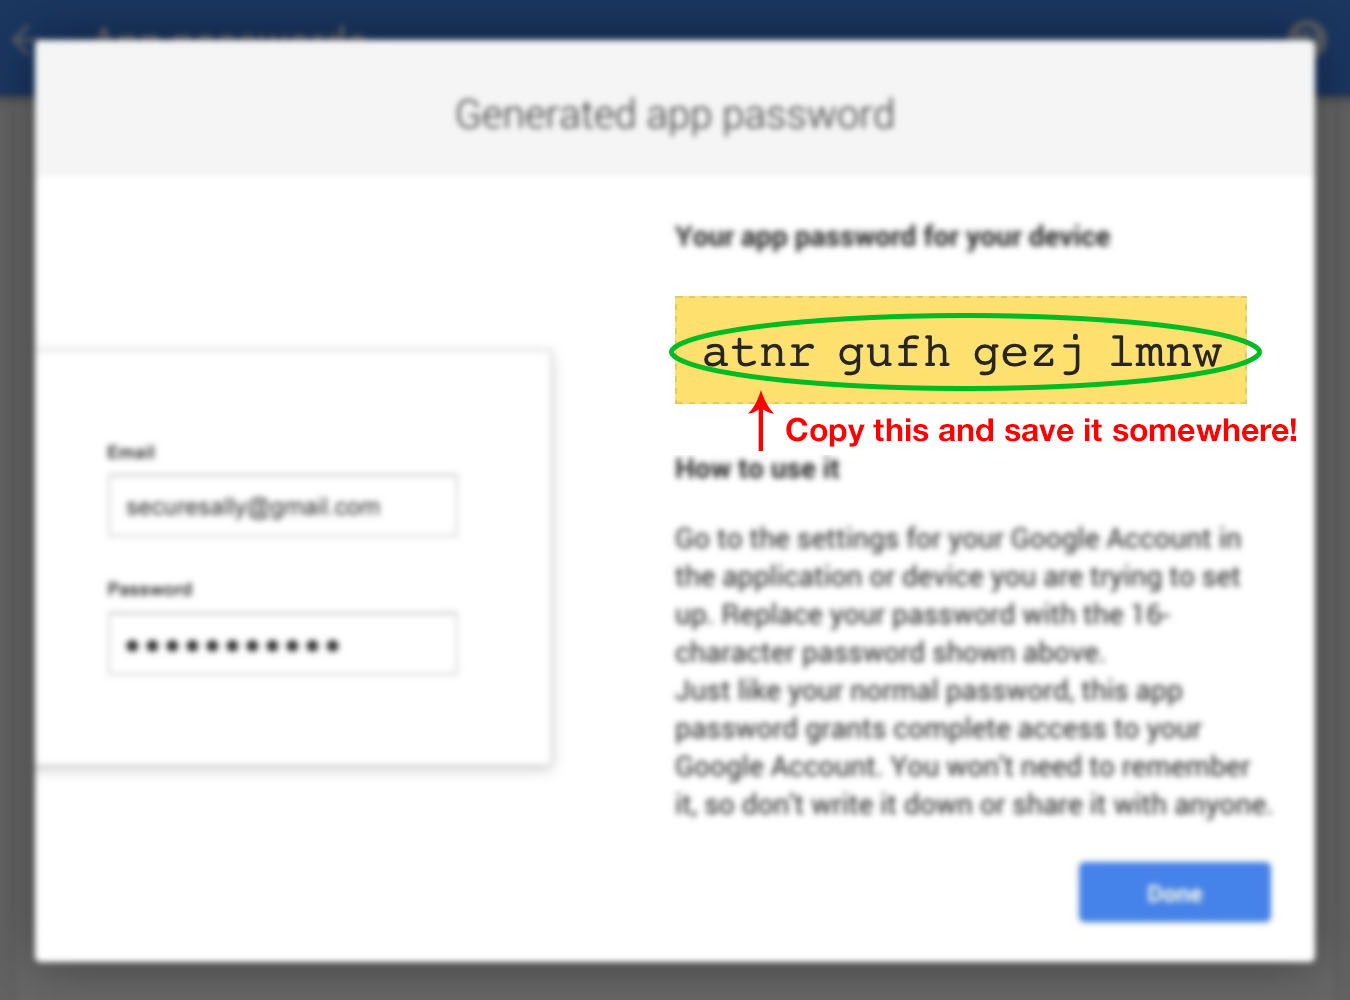 Gmail GoDaddy email forward (10): Generated App password.